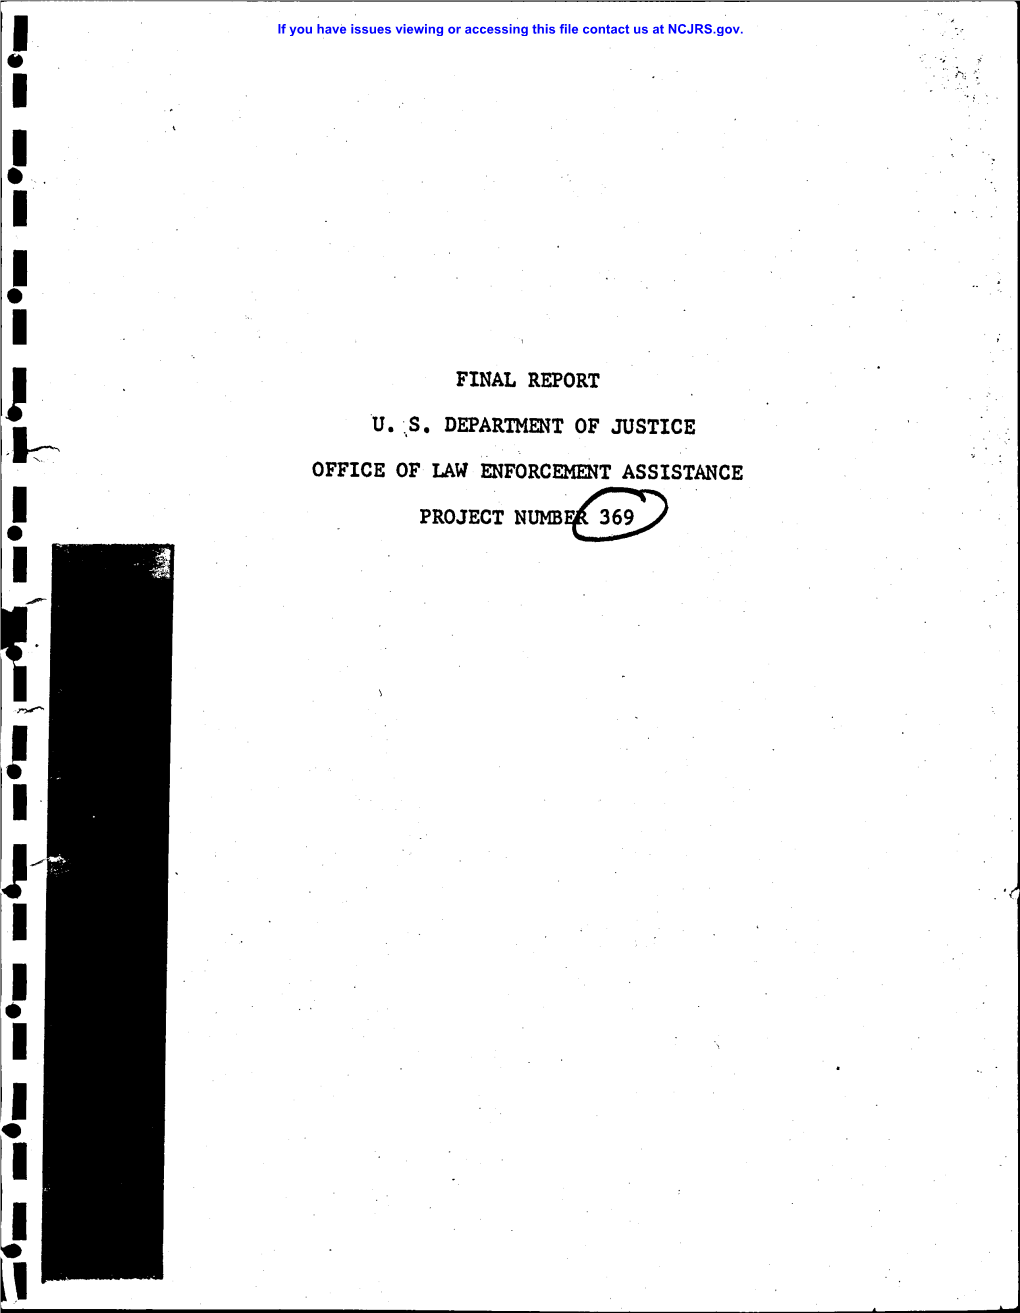 Final Report U. S. Department of Justice Office of Law